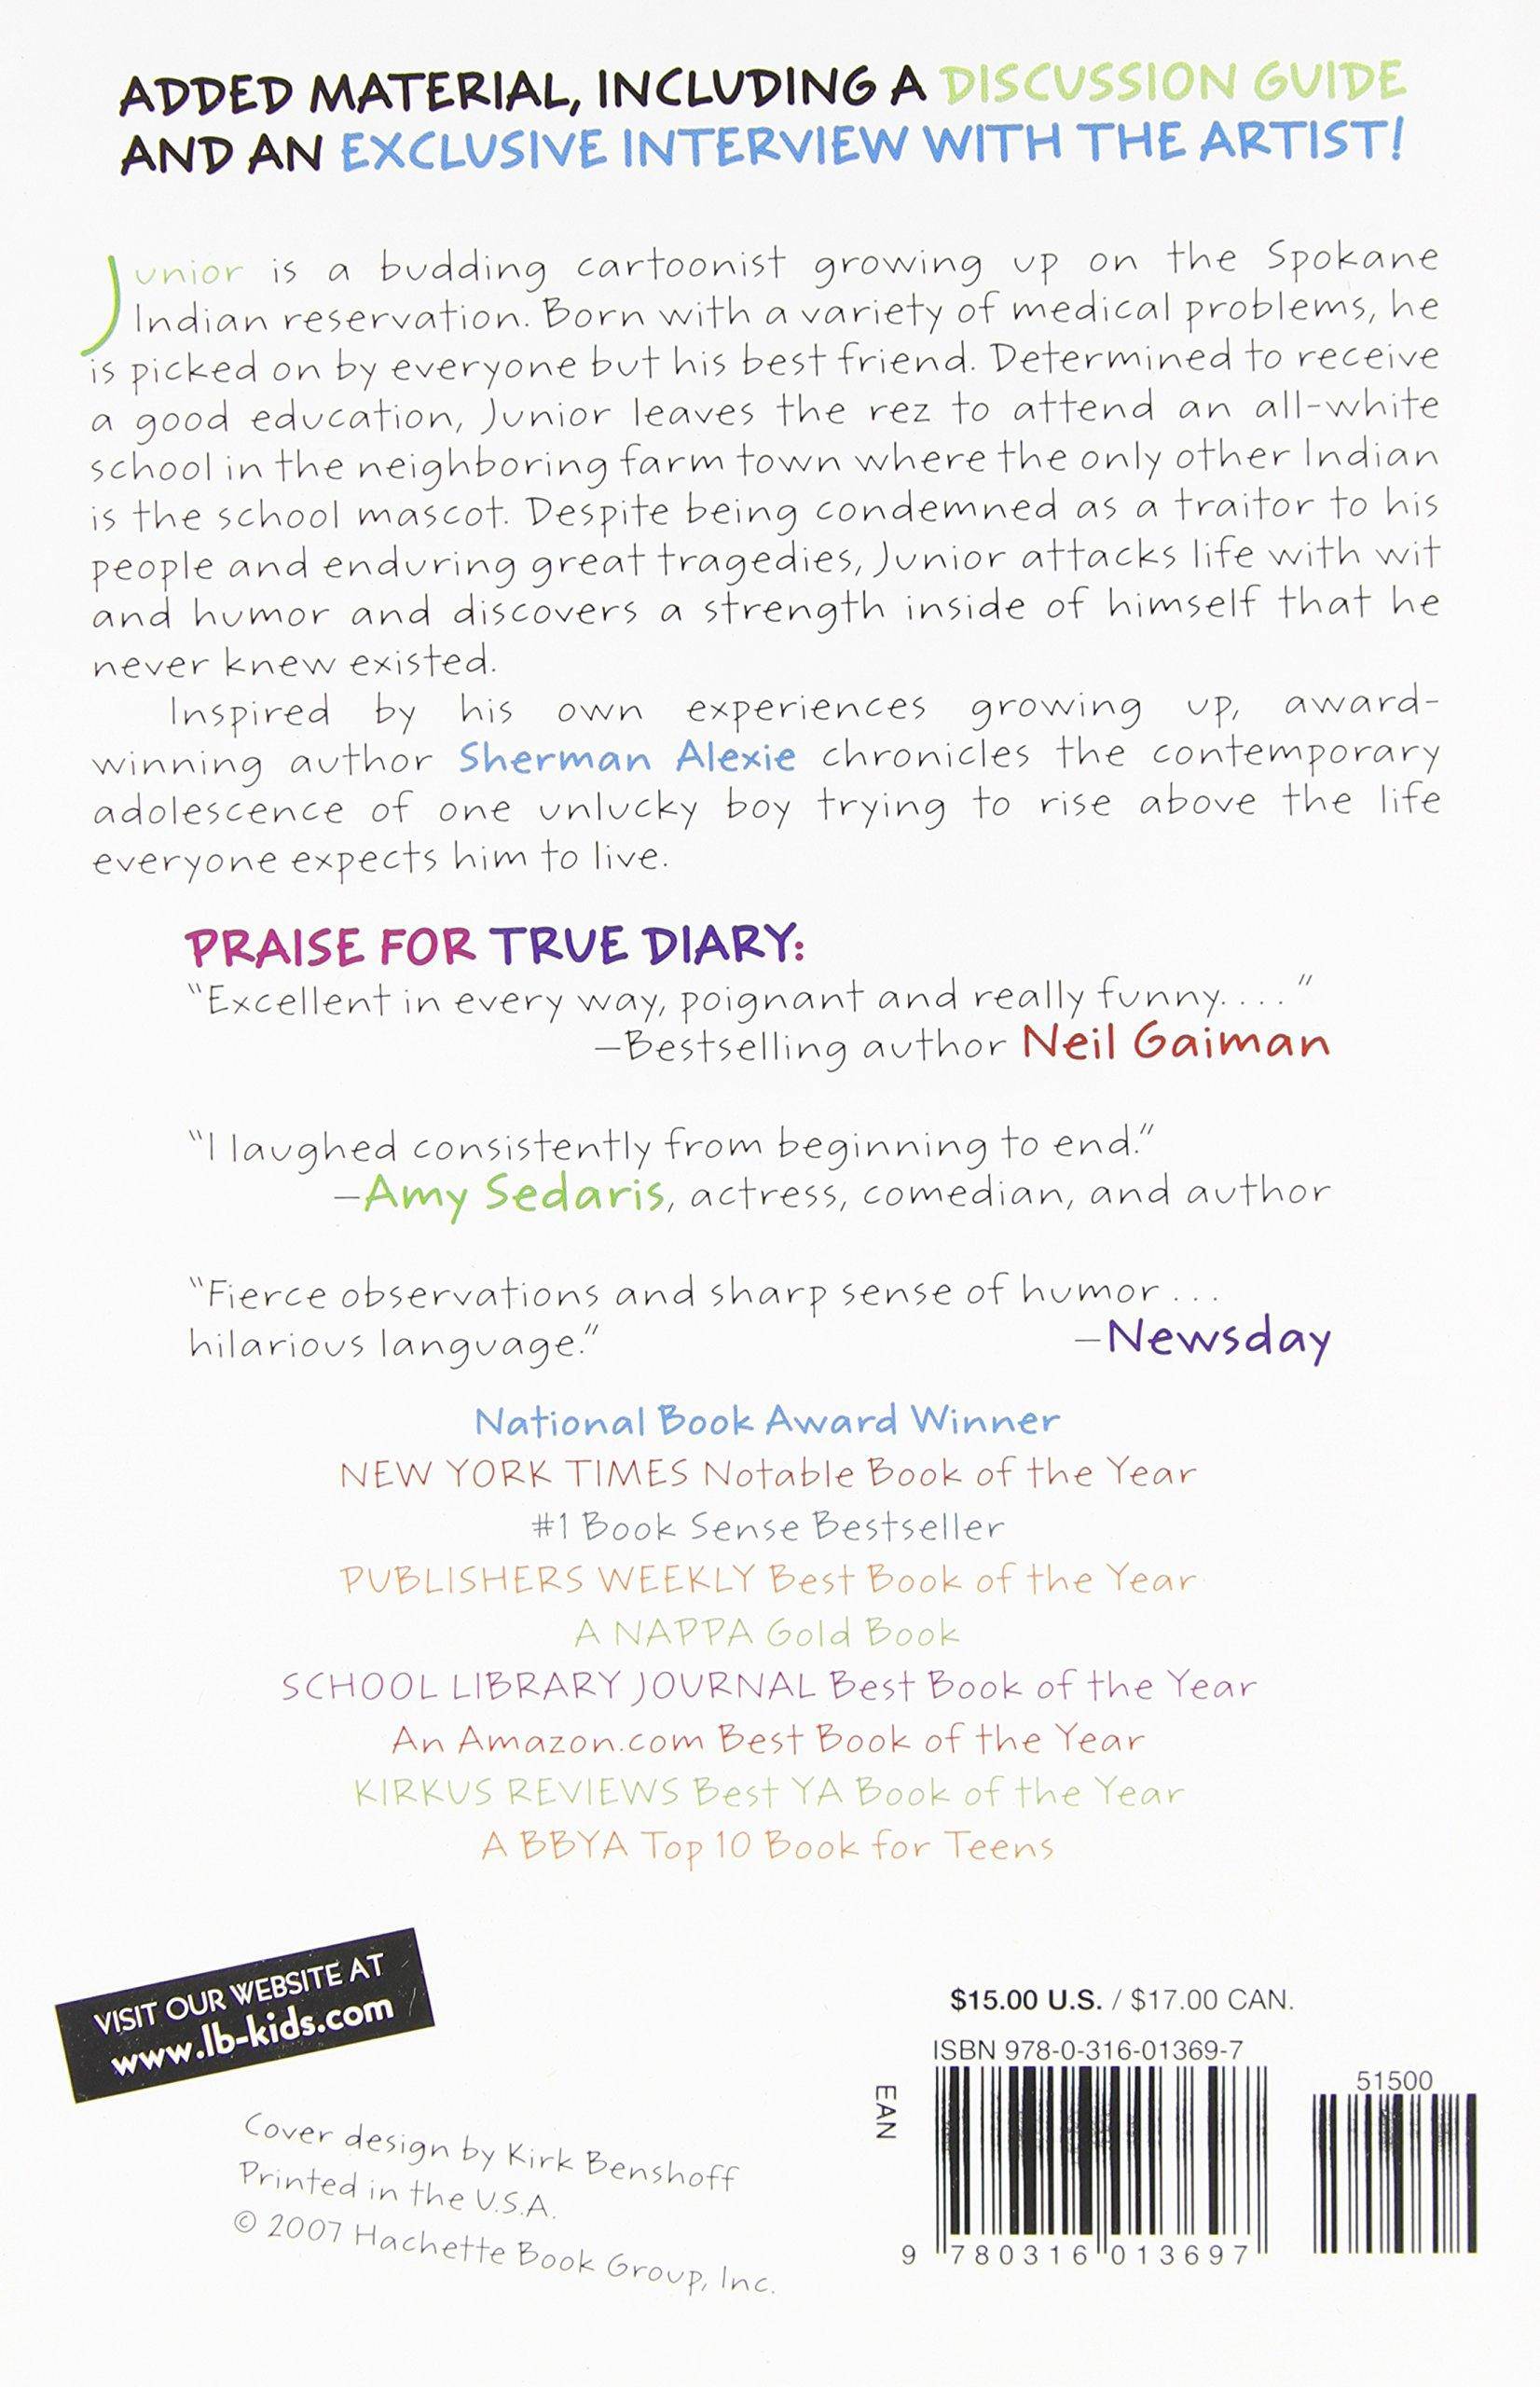 Absolutely True Diary of a Part-Time Indian - SureShot Books Publishing LLC